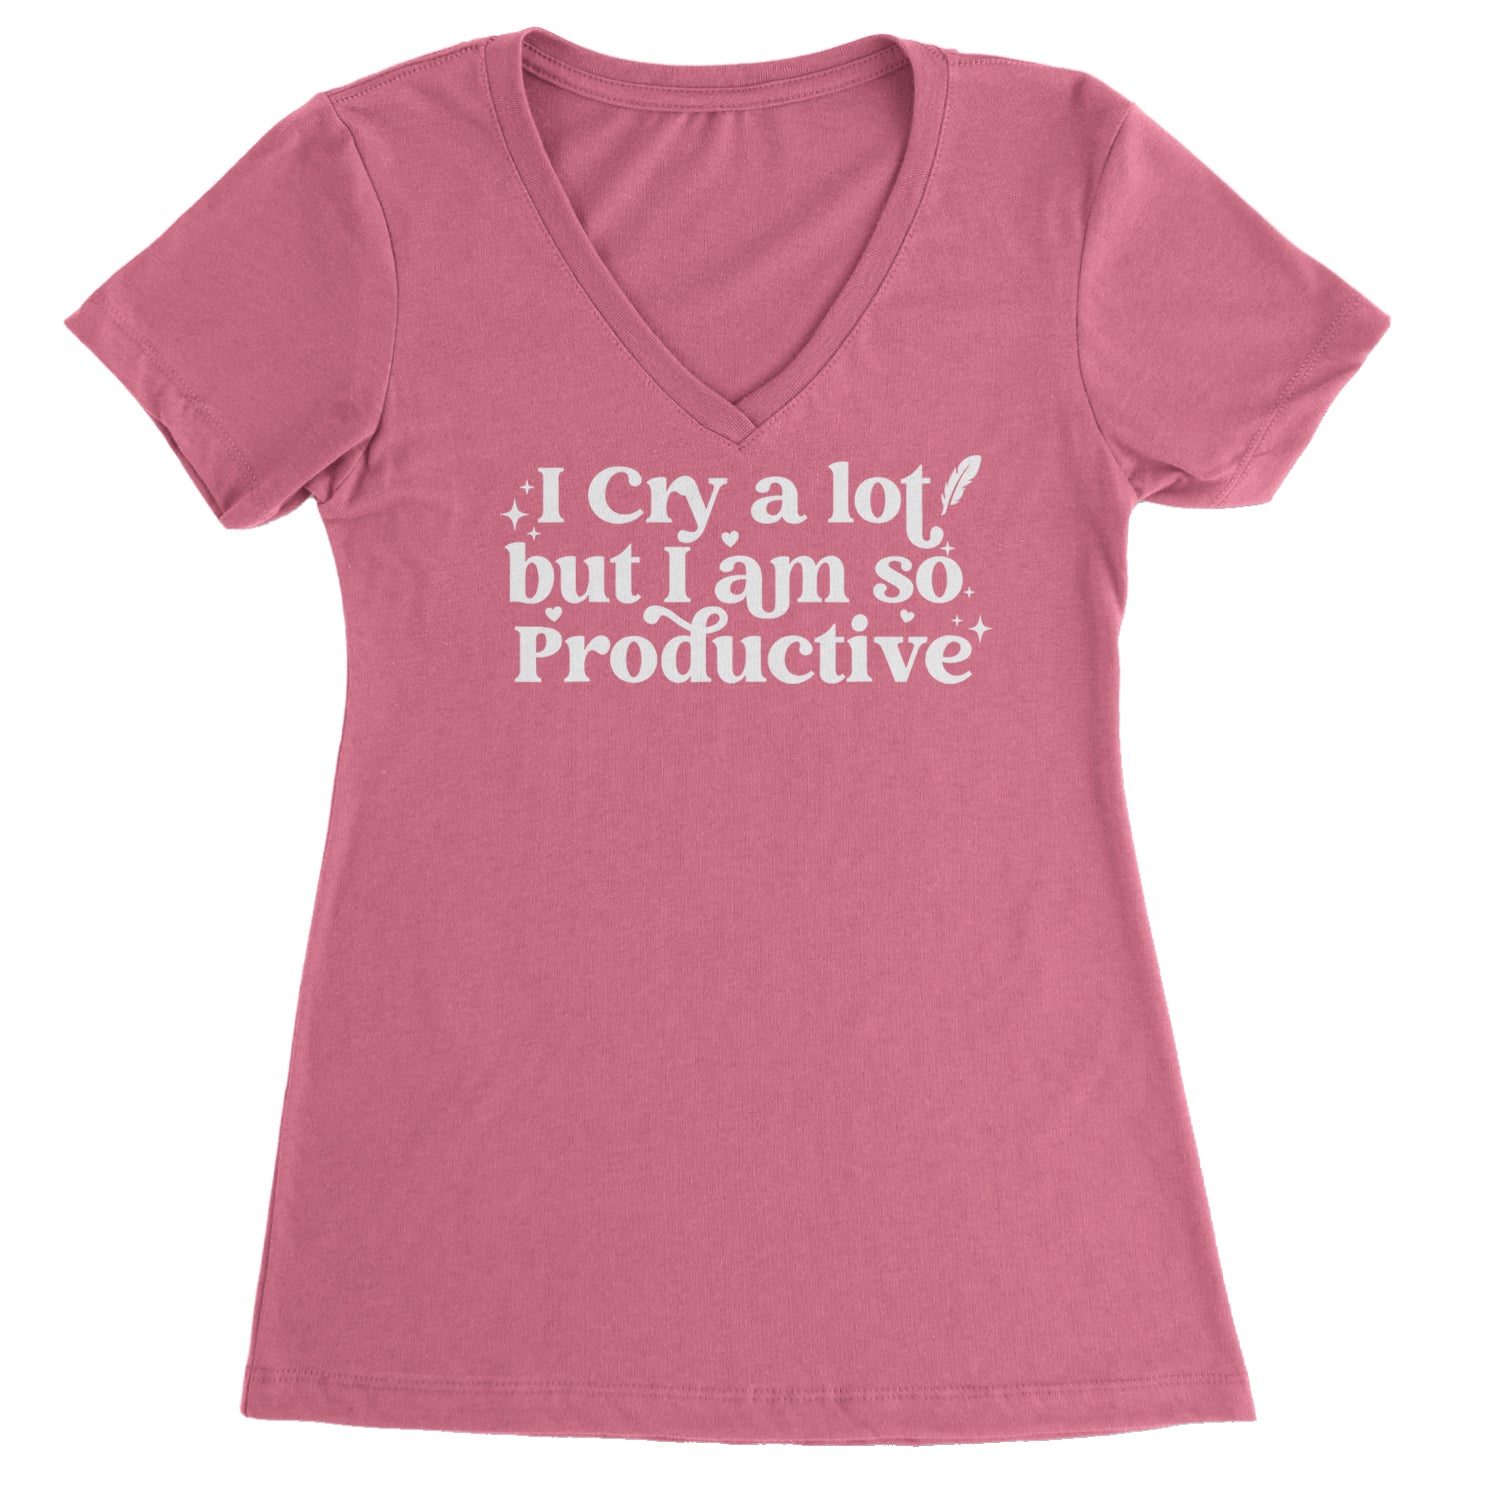 I Cry A Lot But I am So Productive TTPD Ladies V-Neck T-shirt